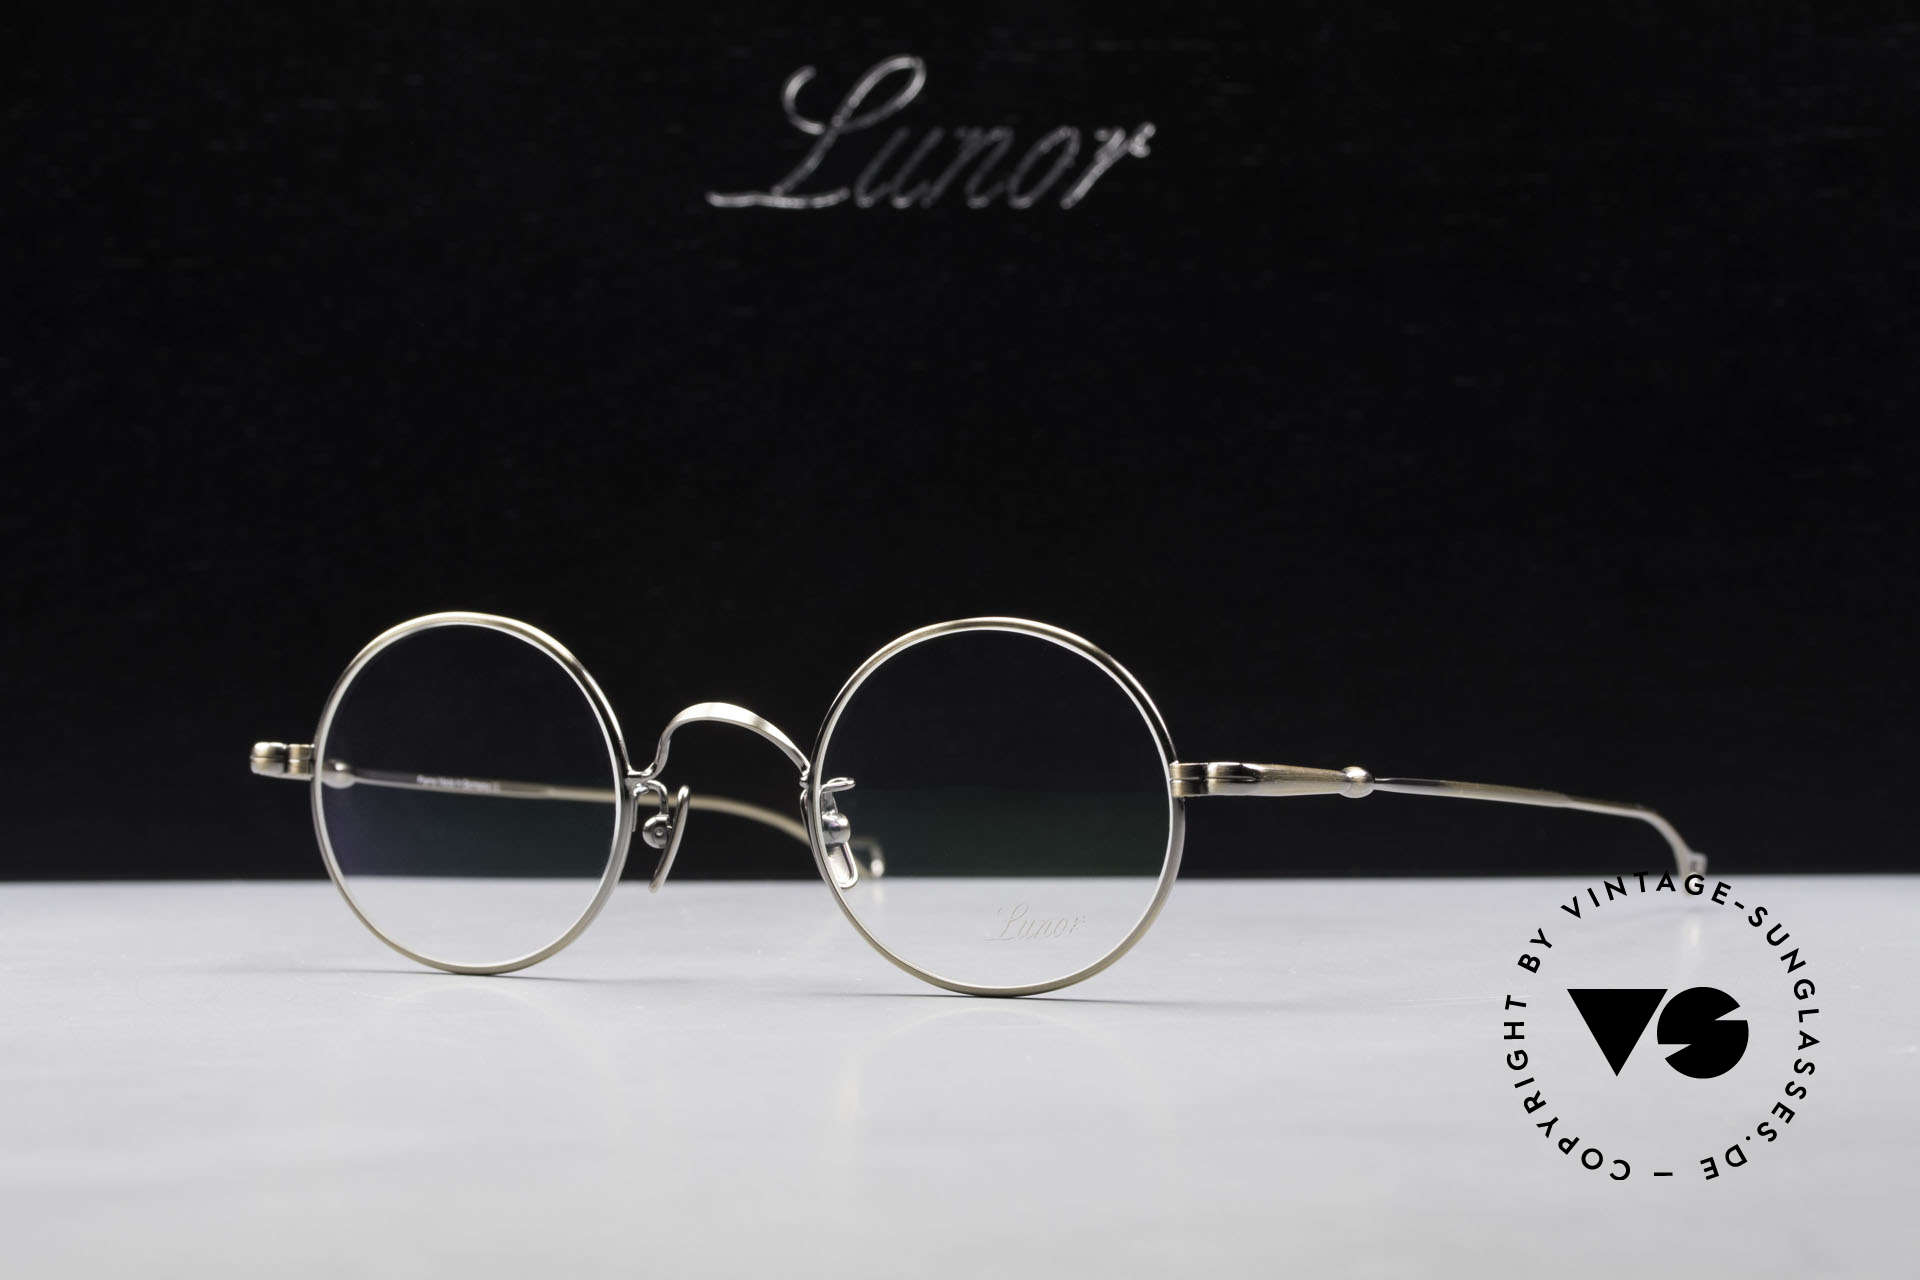 Lunor V 110 Round Lunor Glasses Vintage, Size: medium, Made for Men and Women